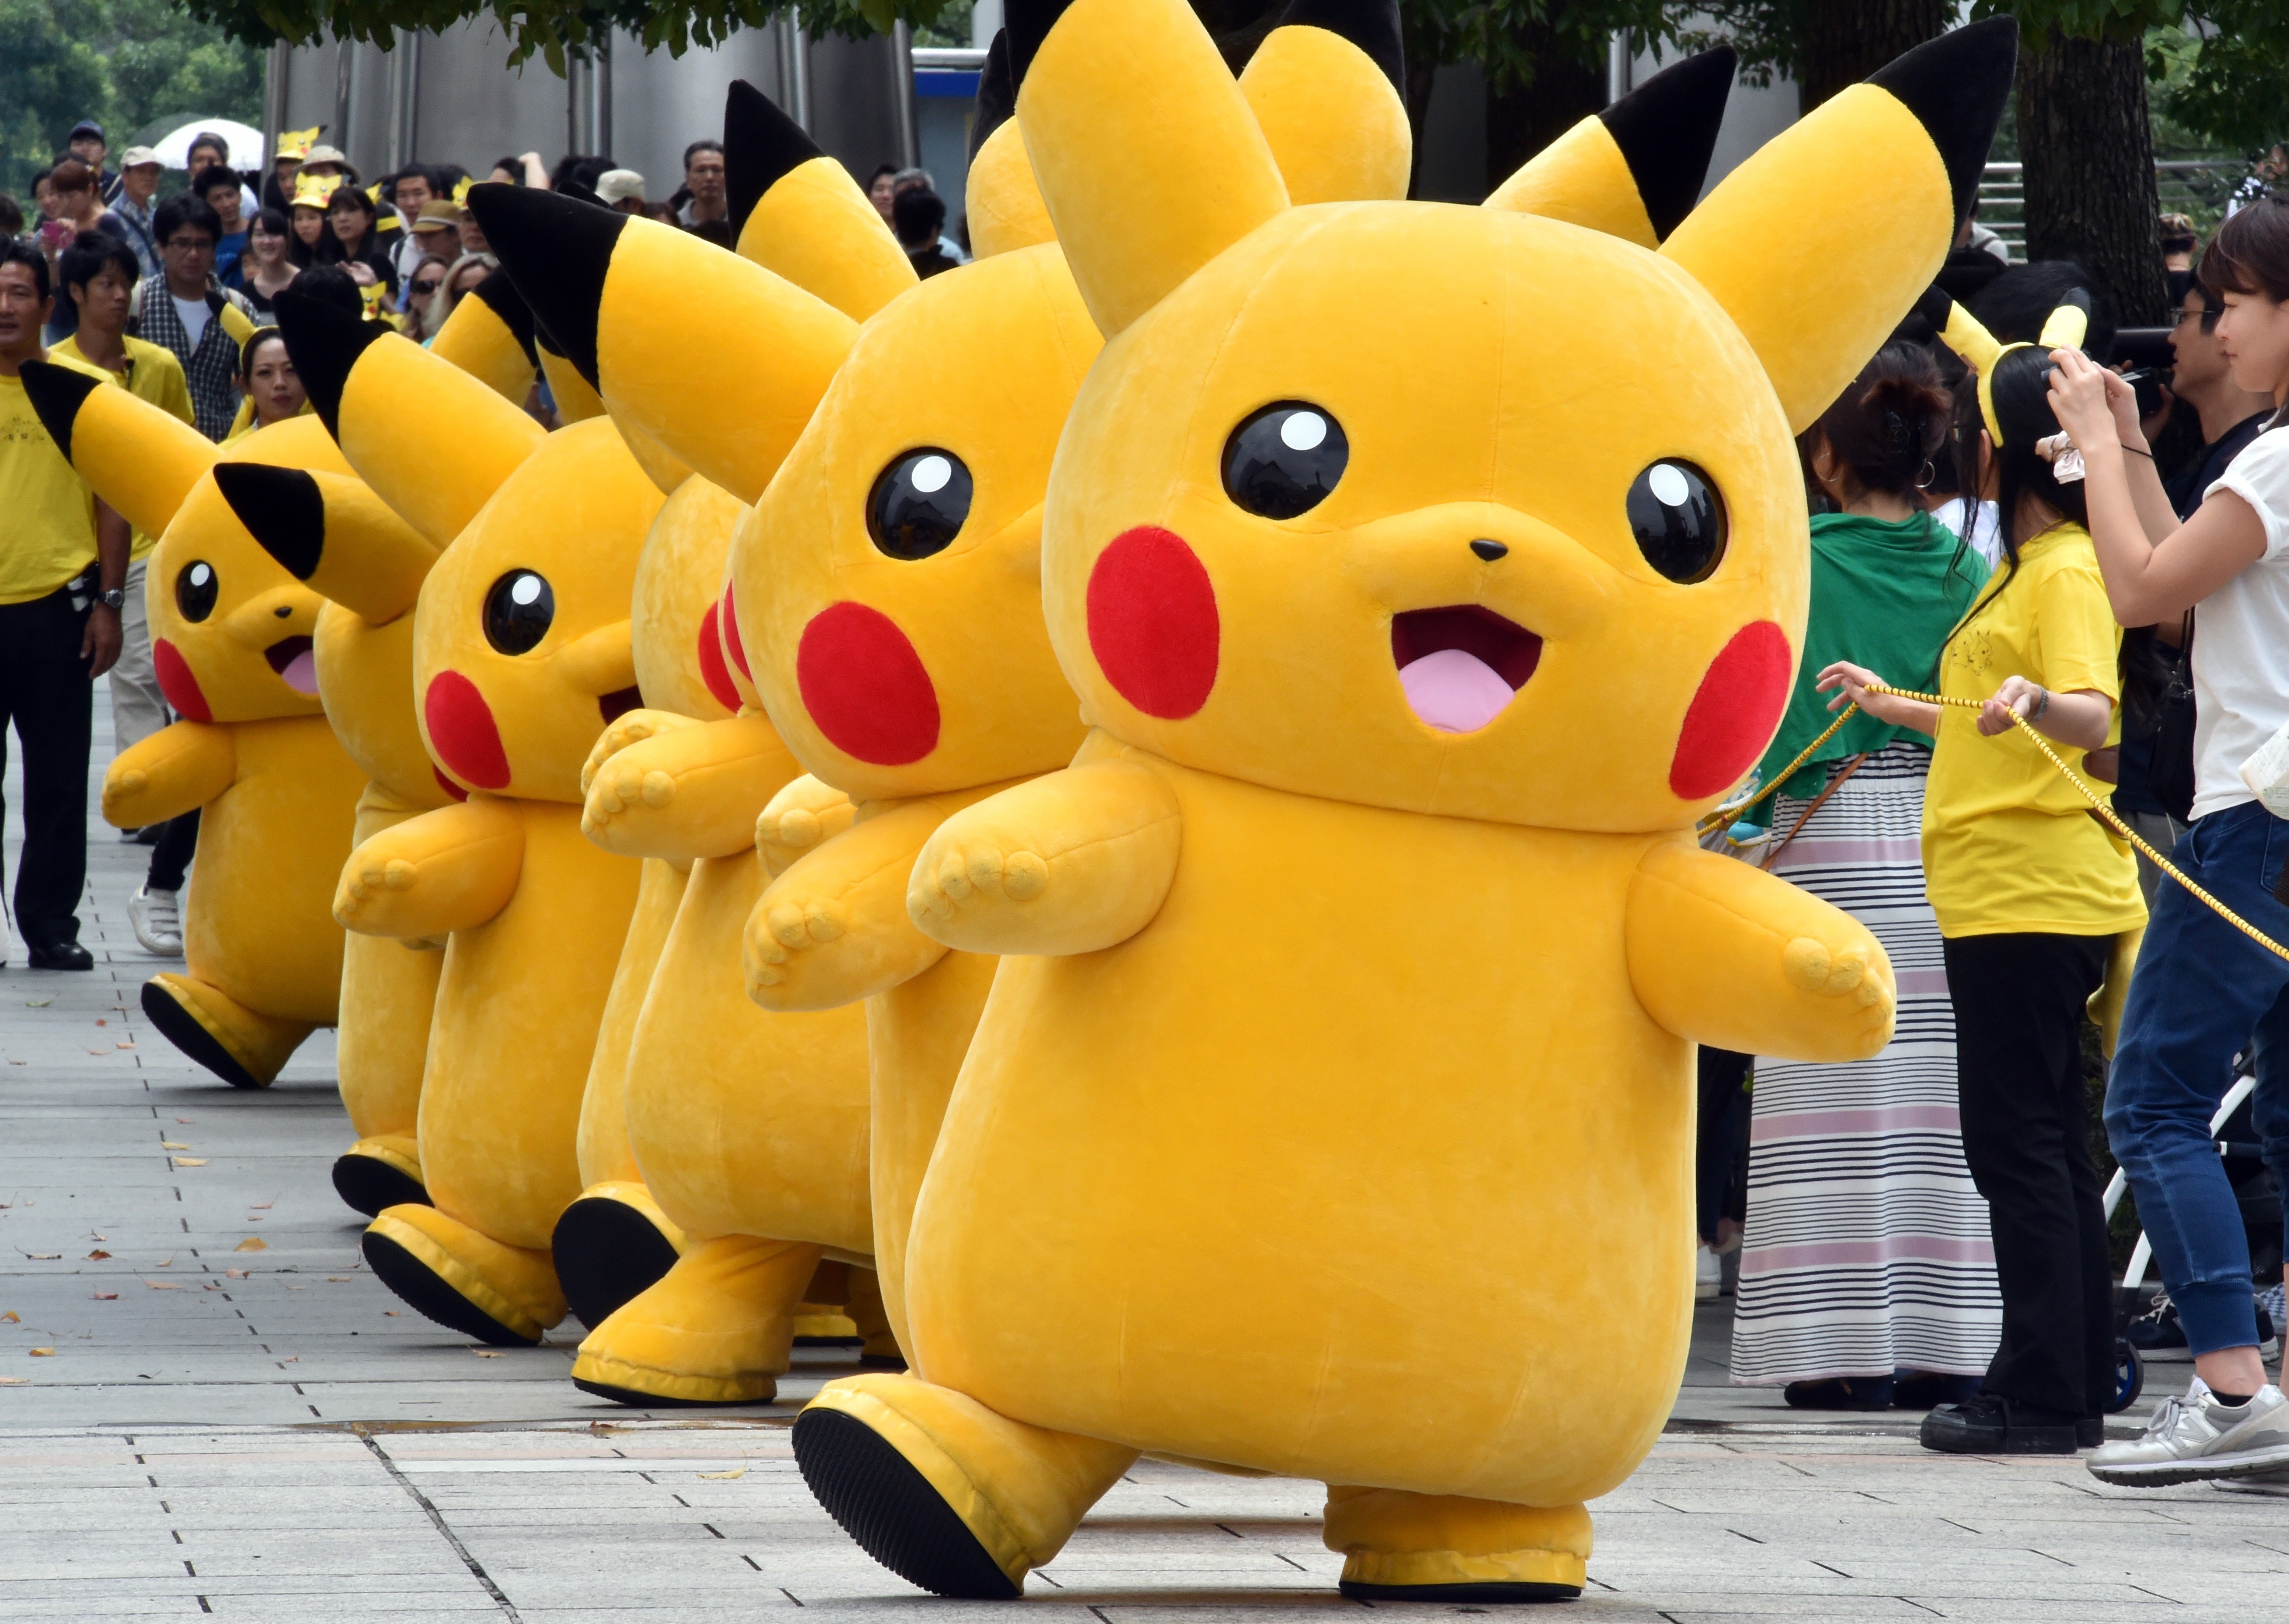 Dozens of Pikachu characters, the famous character of Nintendo's videogame software Pokemon, march at the Landmark Plaza shopping mall in Yokohama, suburban Tokyo on August 13, 2015. (Yoshikazu Tsuno—AFP/Getty Images)